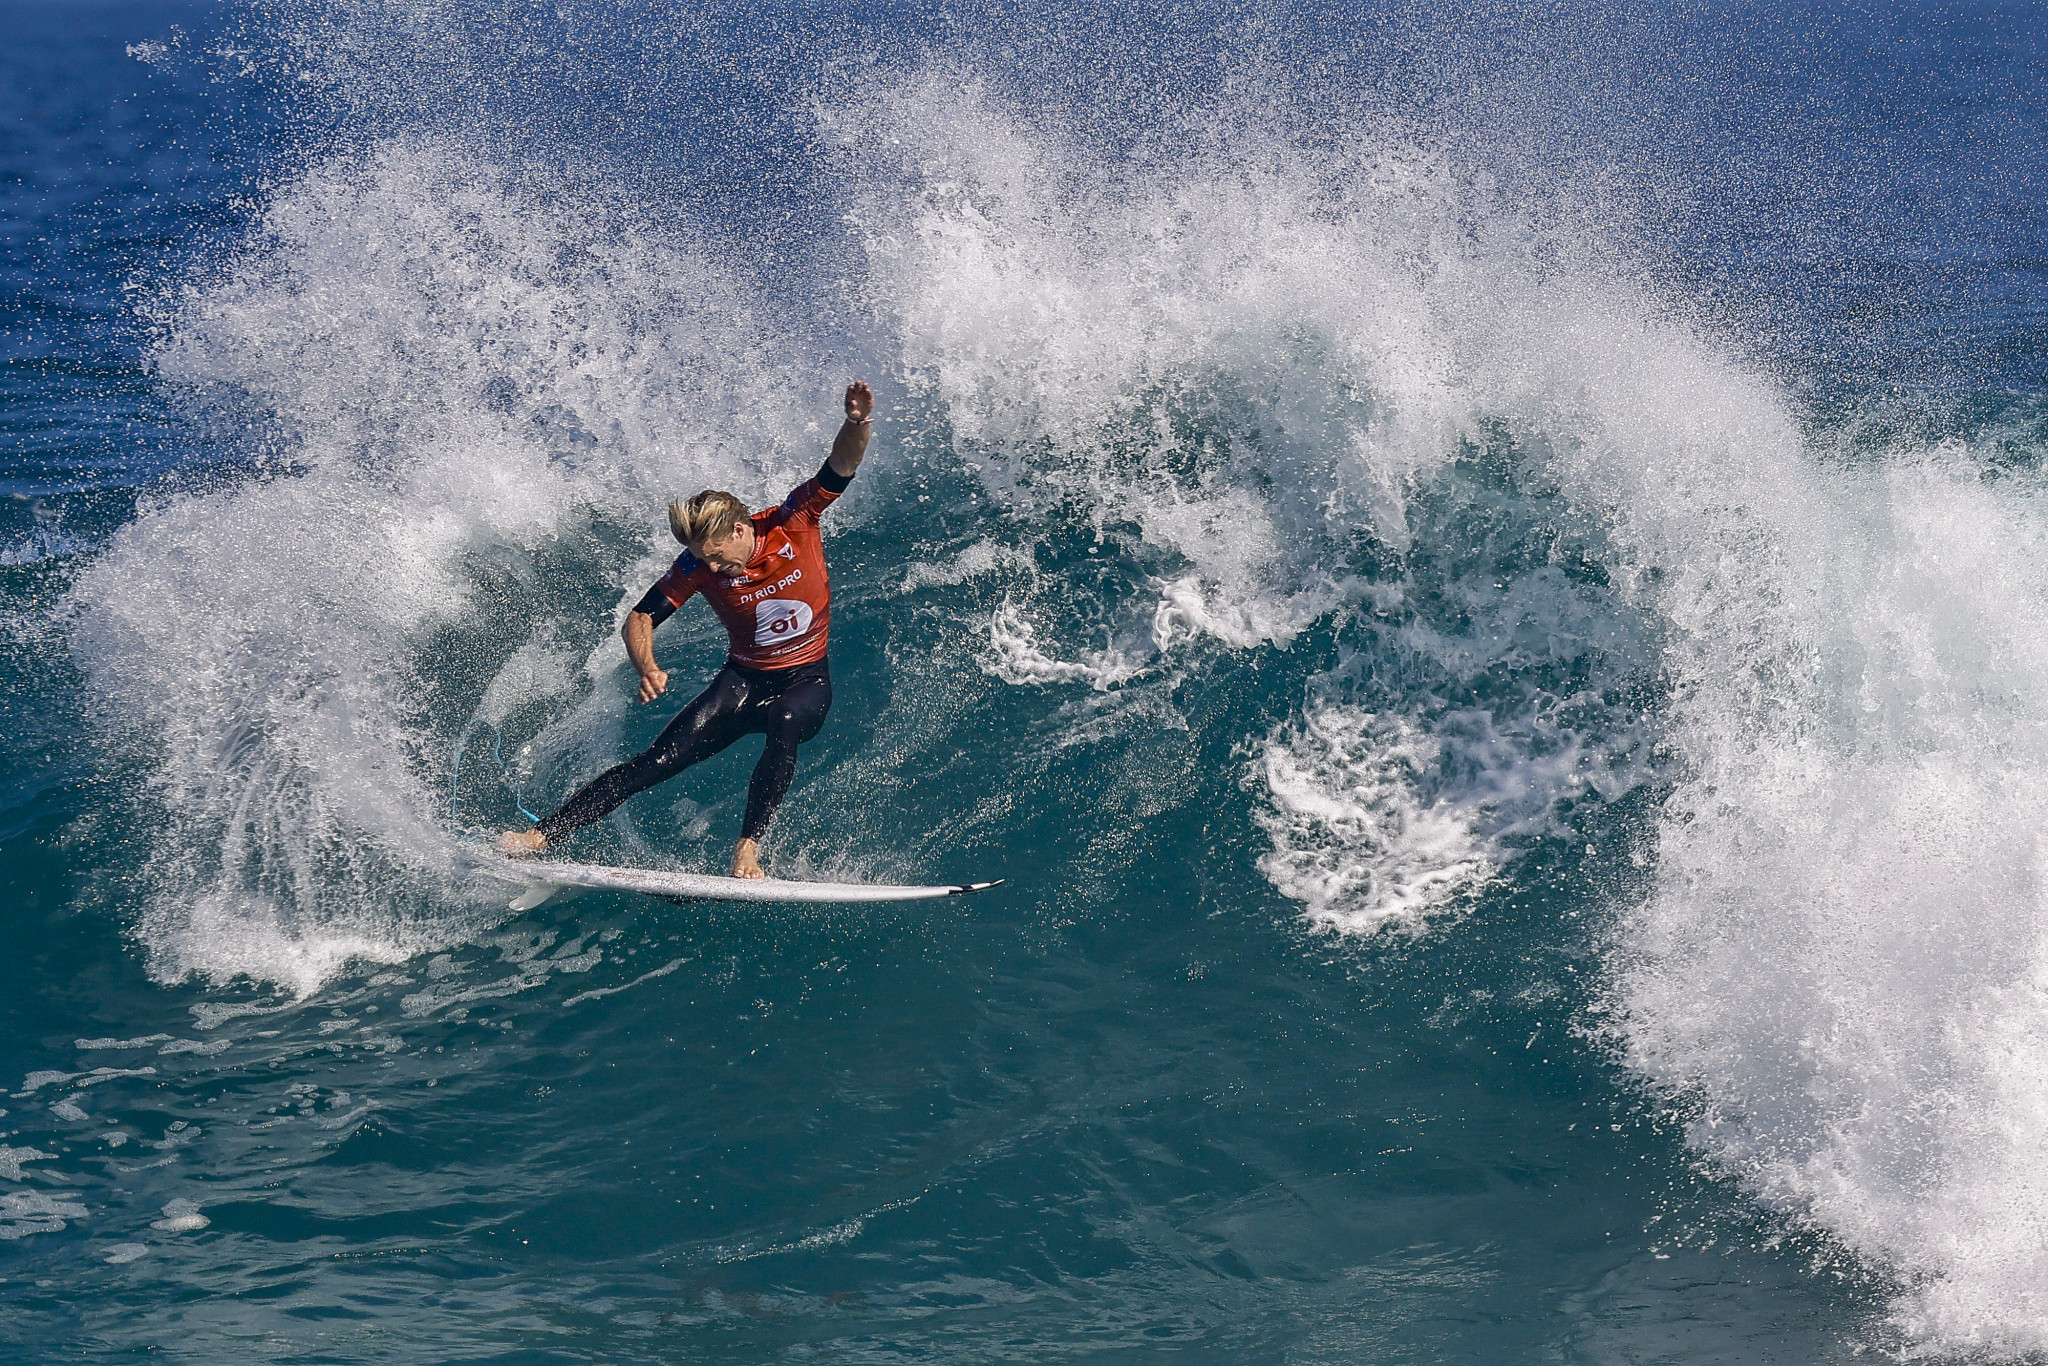 Ewing earns maiden WSL Championship Tour victory at Jeffreys Bay